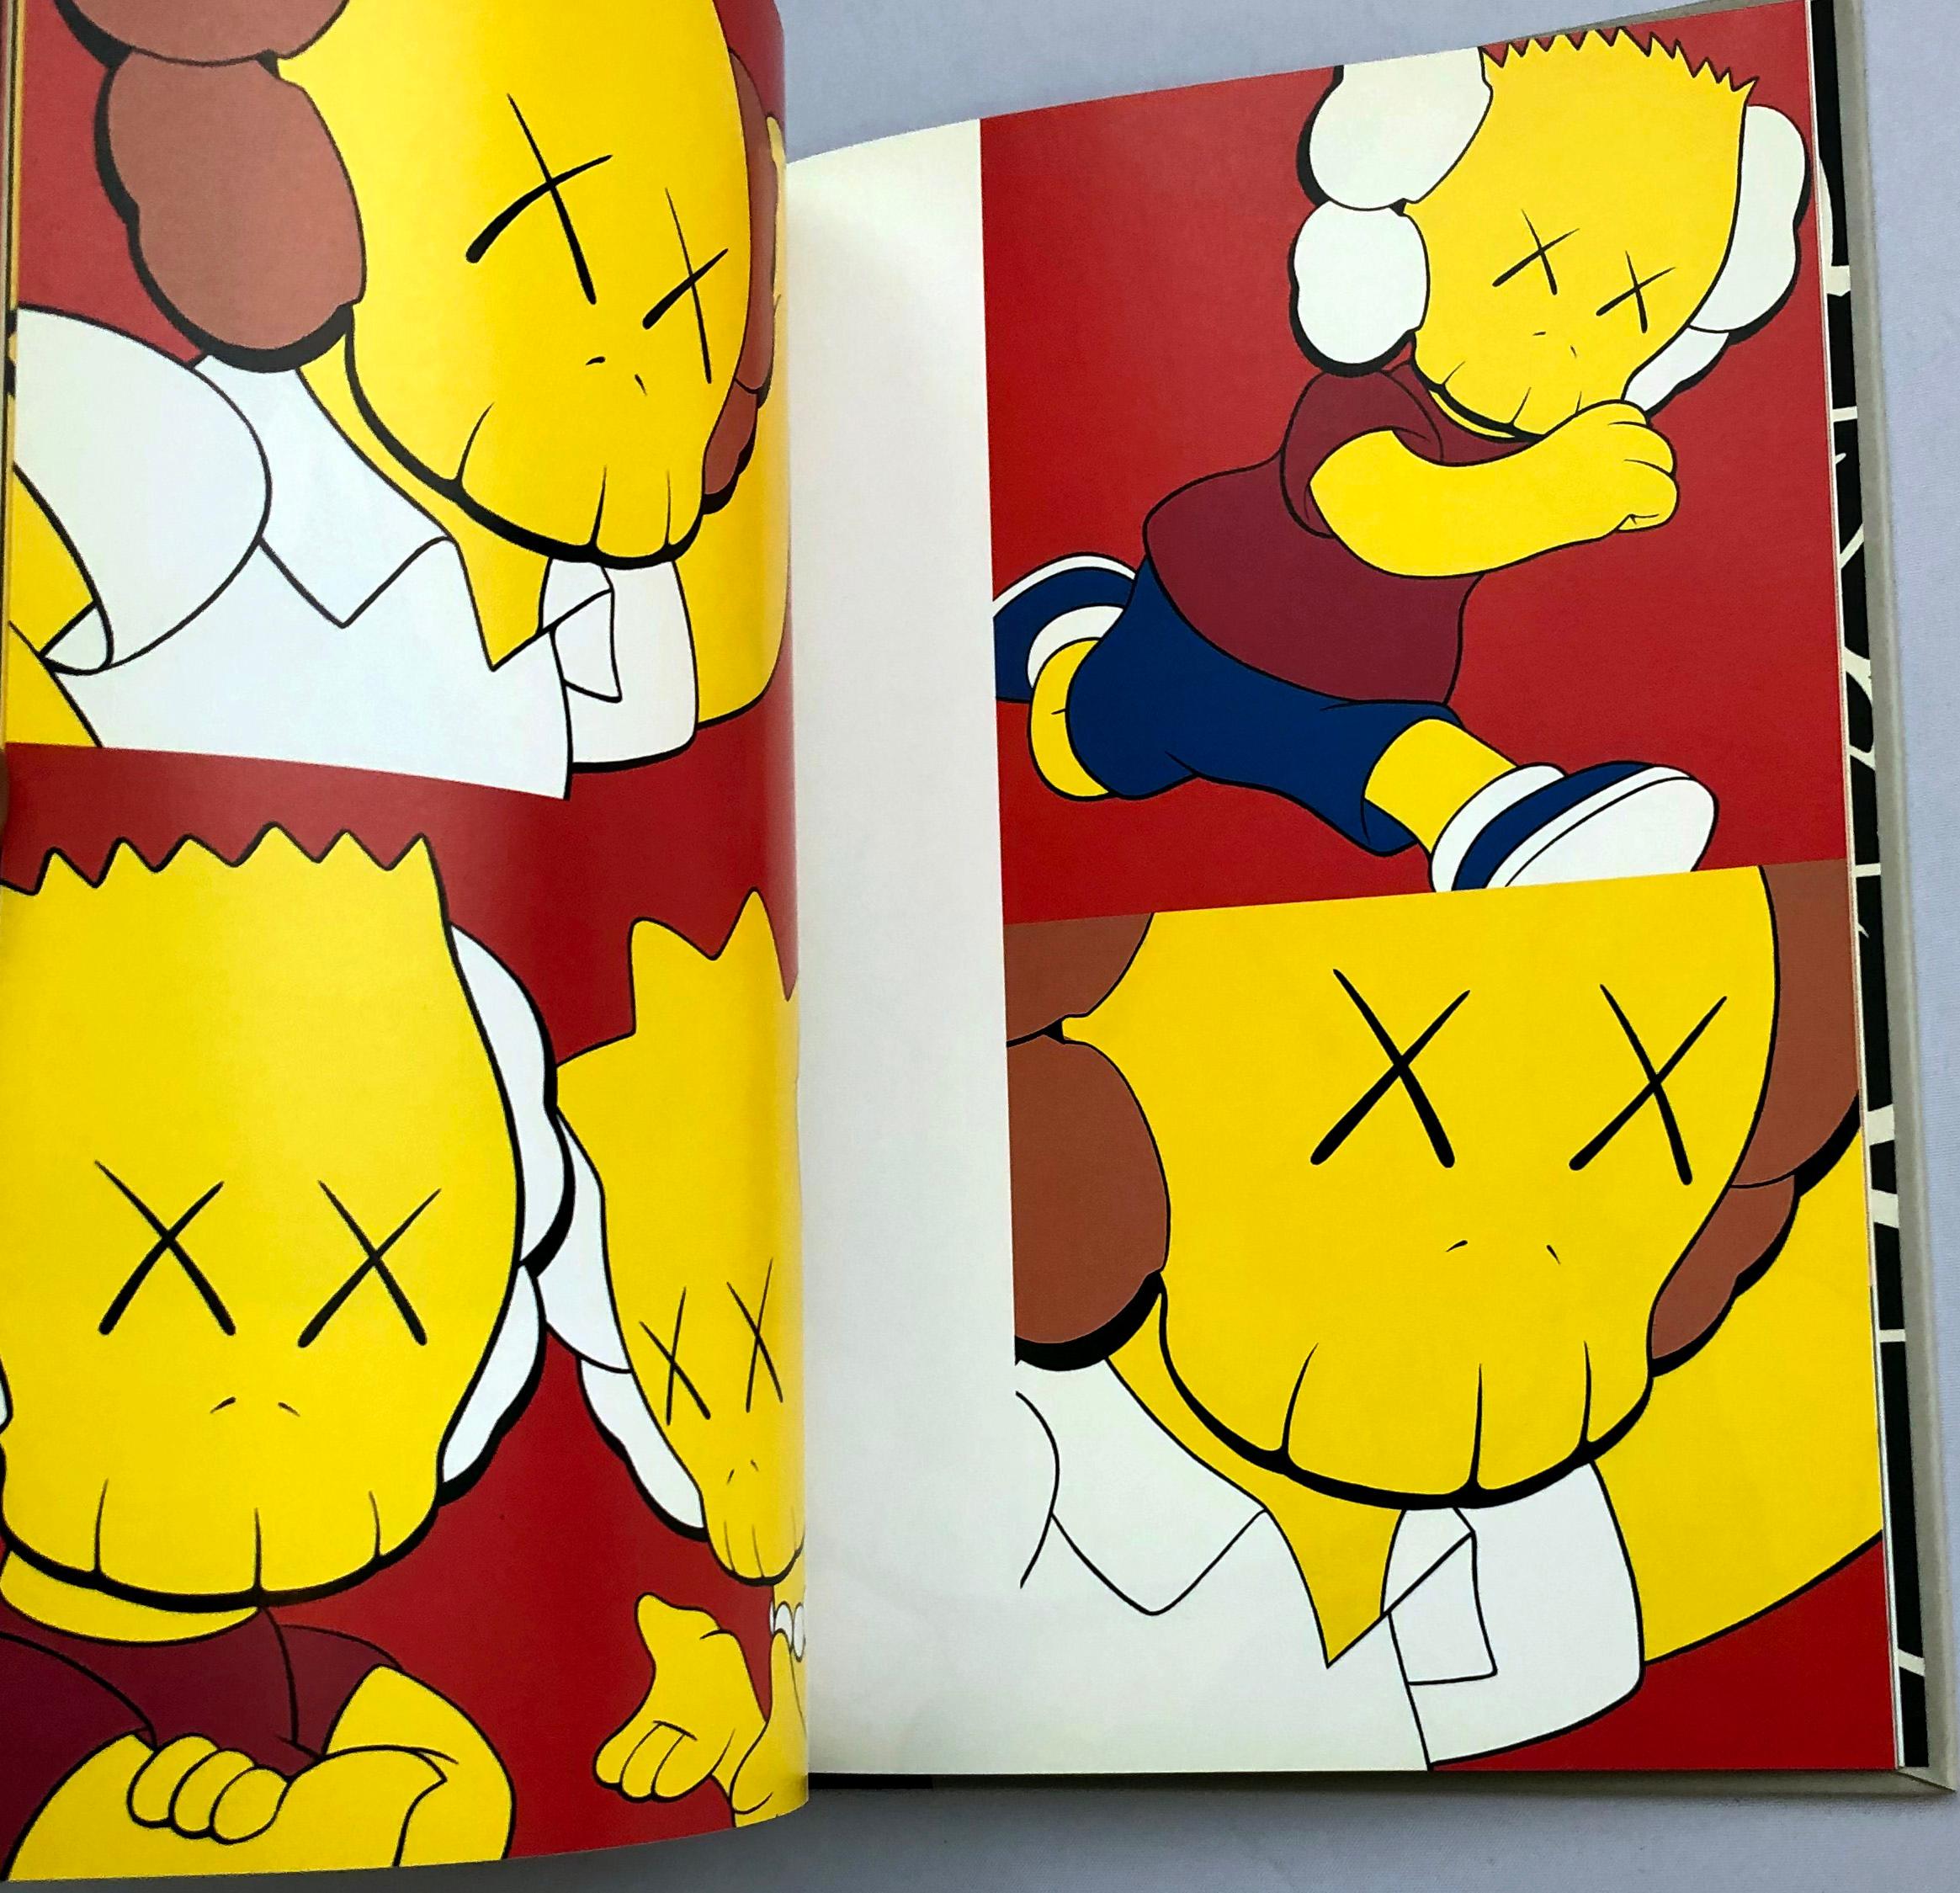 KAWS One: KAWS Artist Monograph, 1st edition, 2001
Hardcover book, 80 pages
Rare and out of print. A definitive look back at the development of the artist's style and early beginnings. 

8.4 x 6.3 x 0.5 inches
Condition: Extremely minor shelf wear;